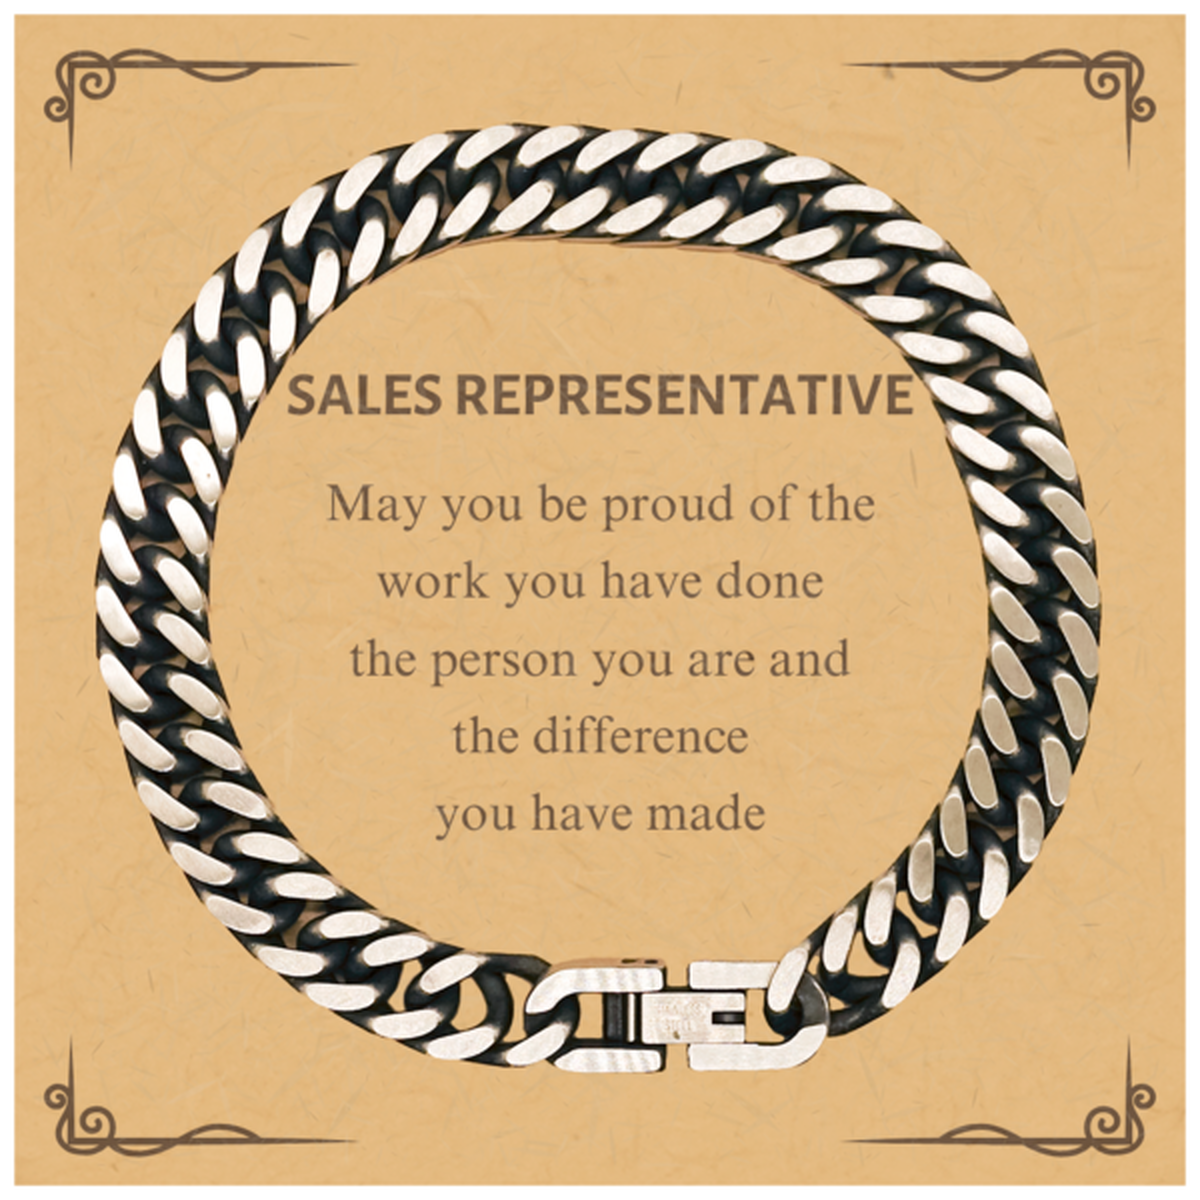 Sales Representative May you be proud of the work you have done, Retirement Sales Representative Cuban Link Chain Bracelet for Colleague Appreciation Gifts Amazing for Sales Representative